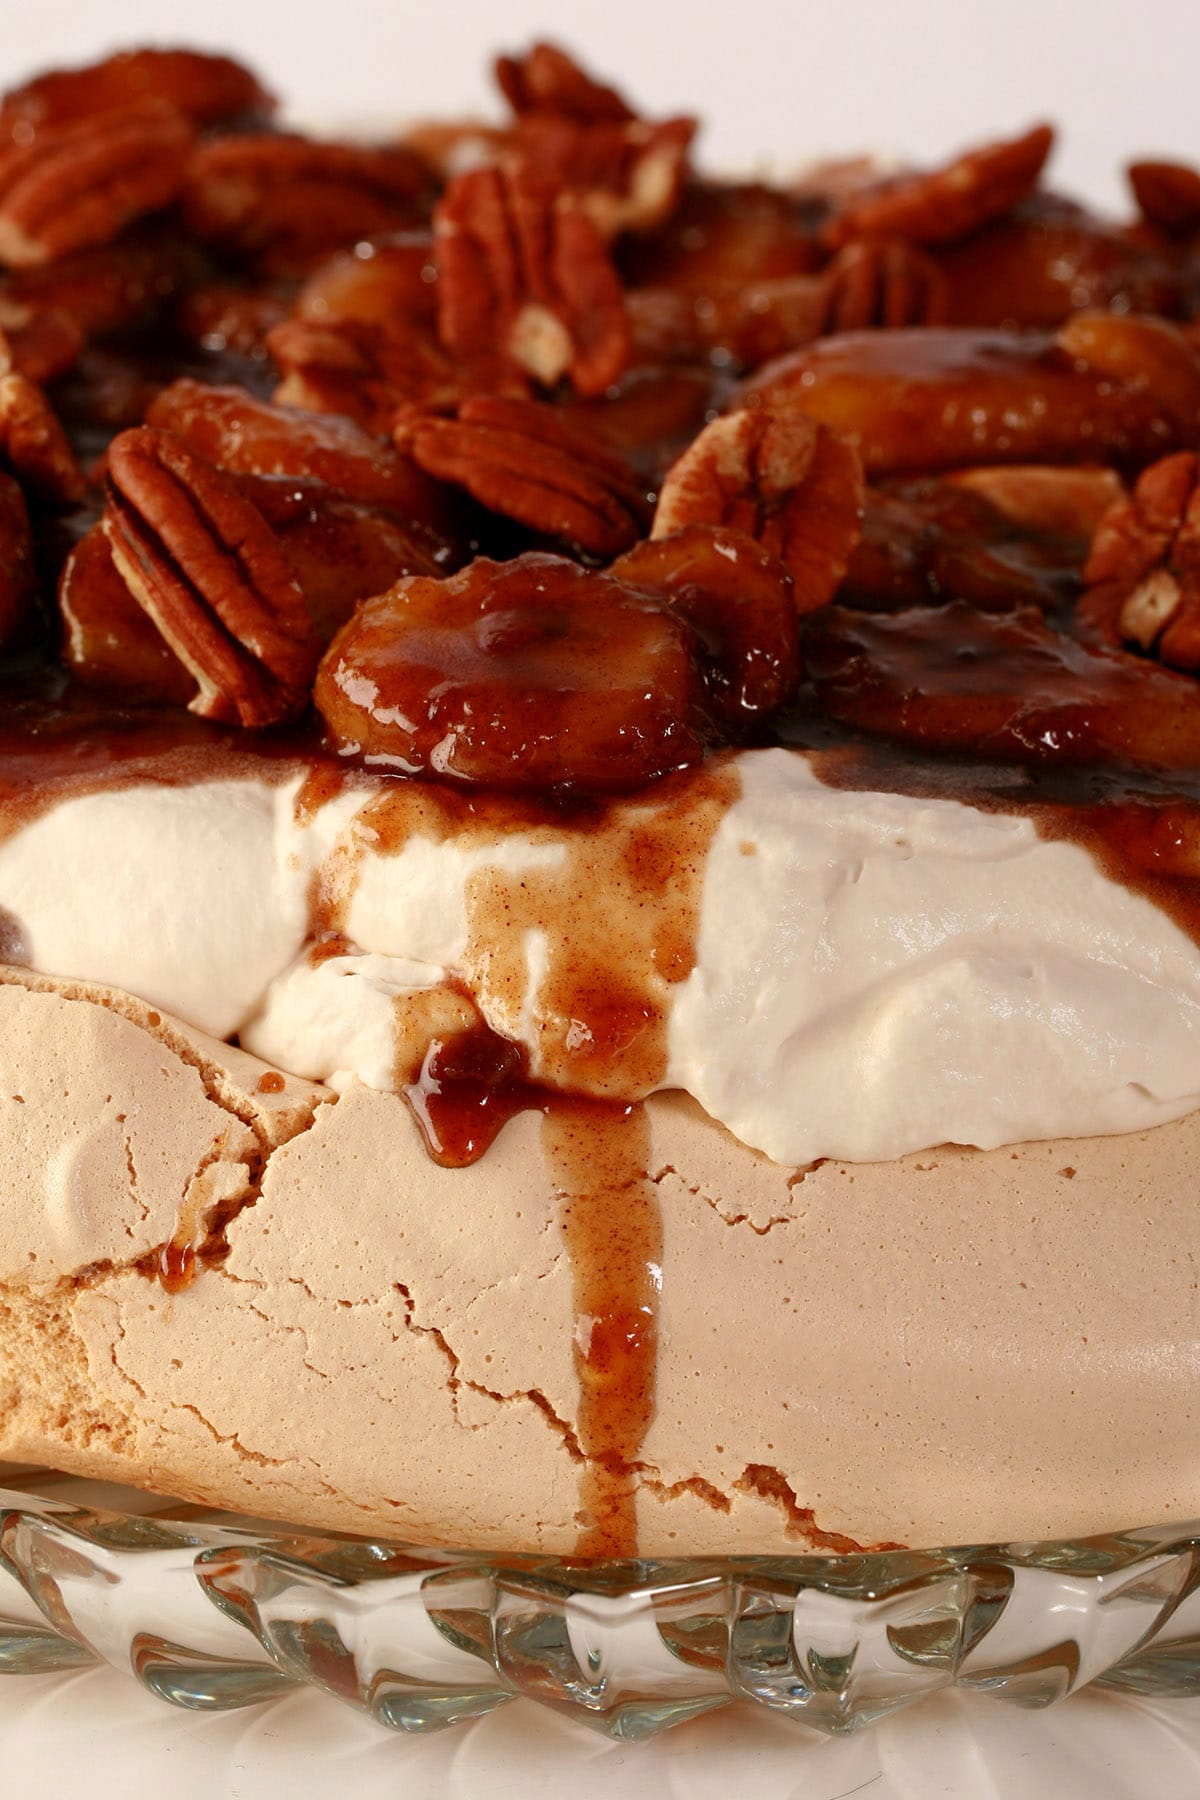 A very close up view of a brown sugar pavlova, topped with bananas foster.